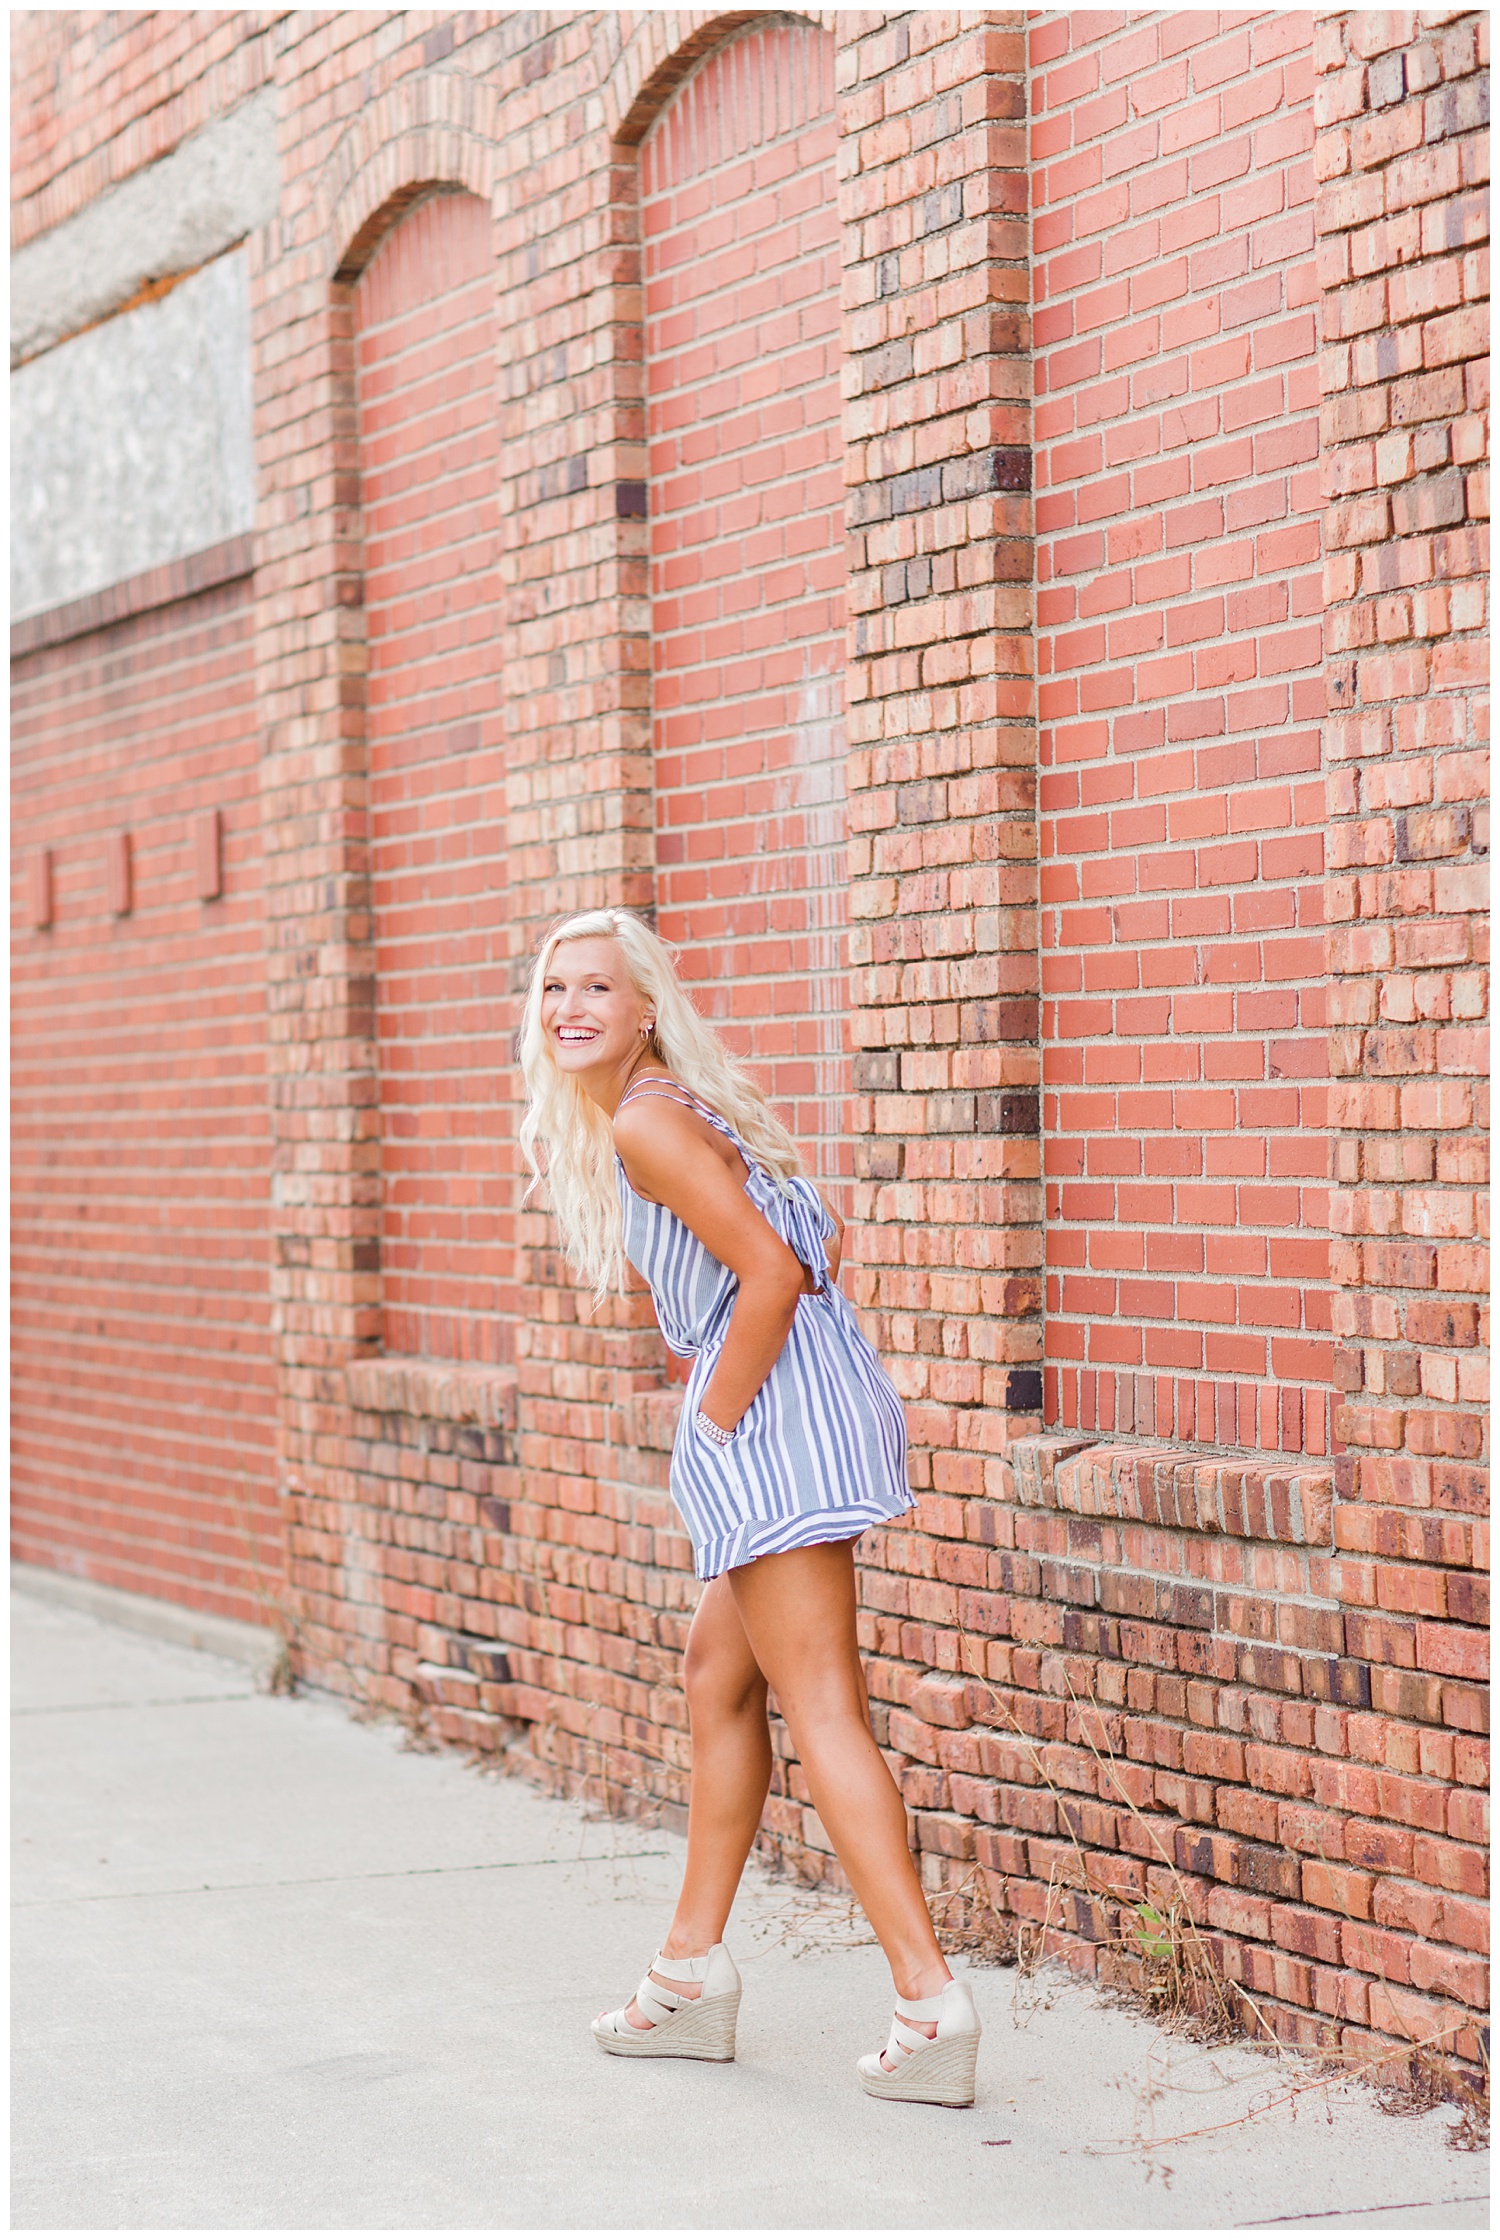 Senior girl wearing a white and blue romper laughs while walking down an alley way in downtown Algona, Iowa | CB Studio